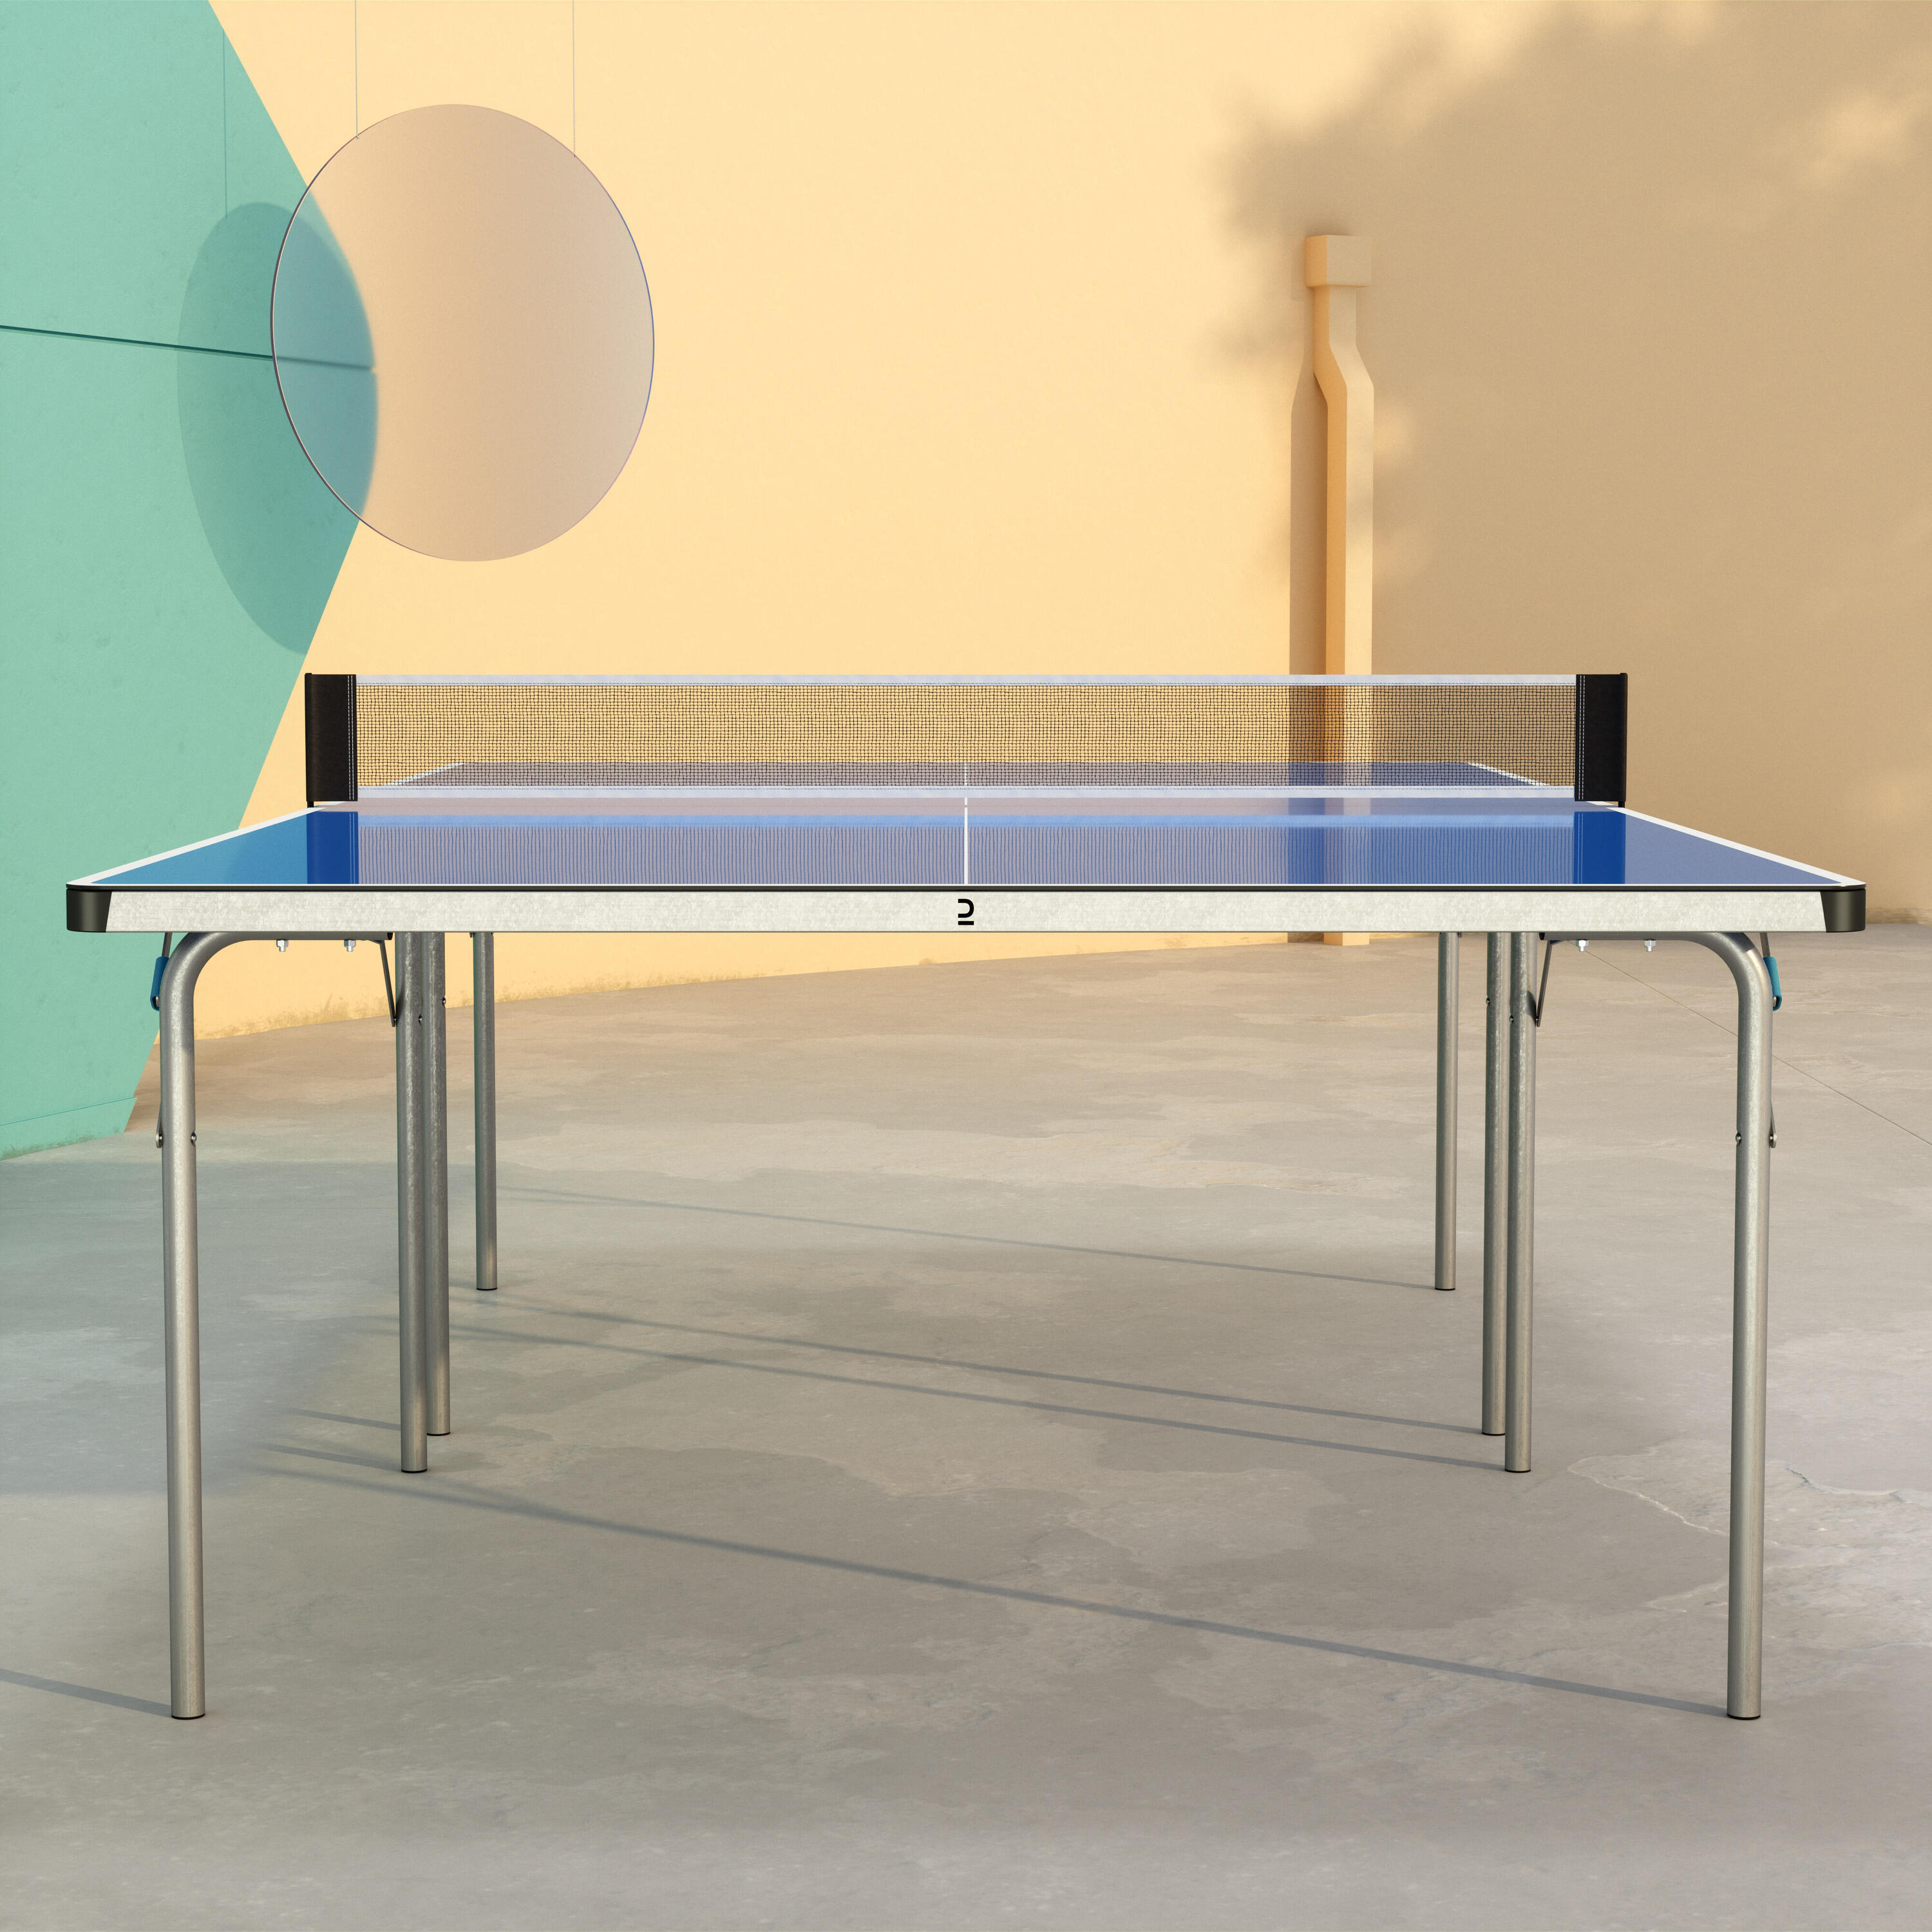 Outdoor Table Tennis Table PPT 130 - Blue 7/10